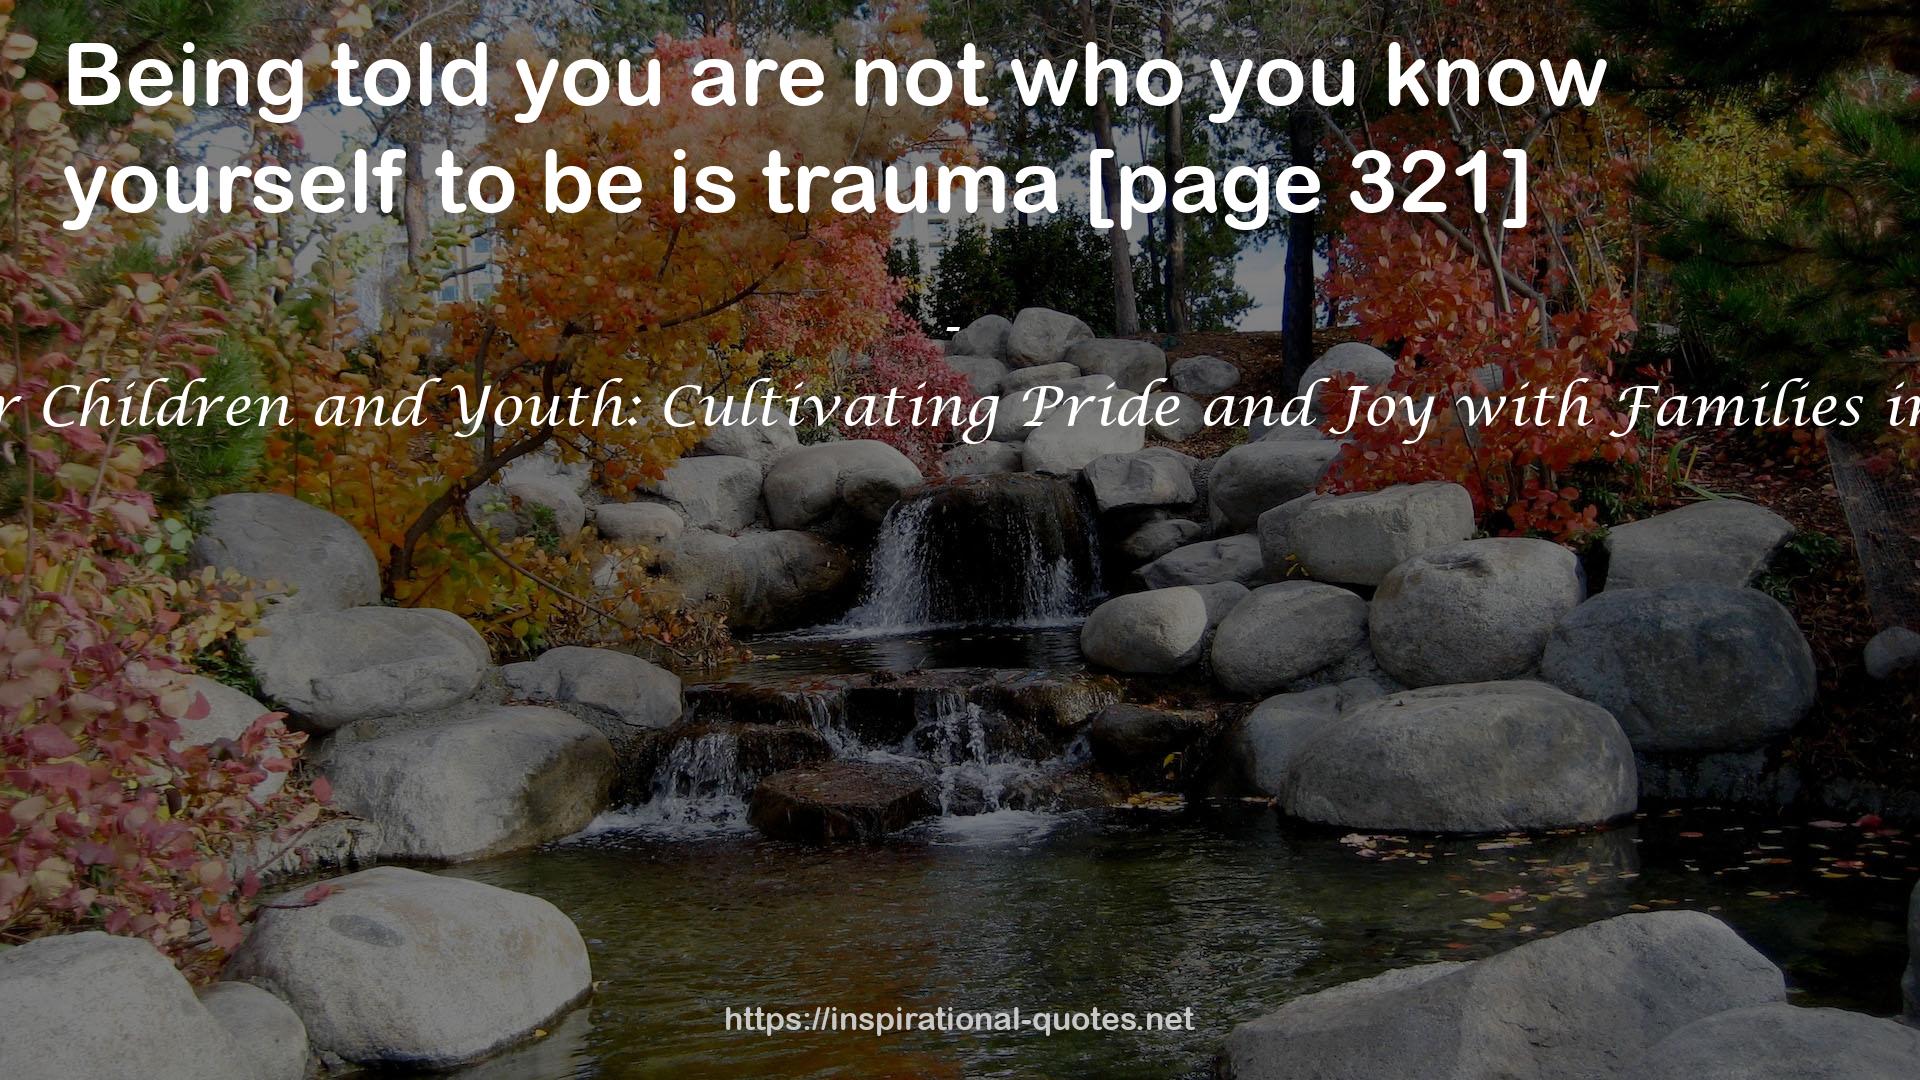 Transgender Children and Youth: Cultivating Pride and Joy with Families in Transition QUOTES